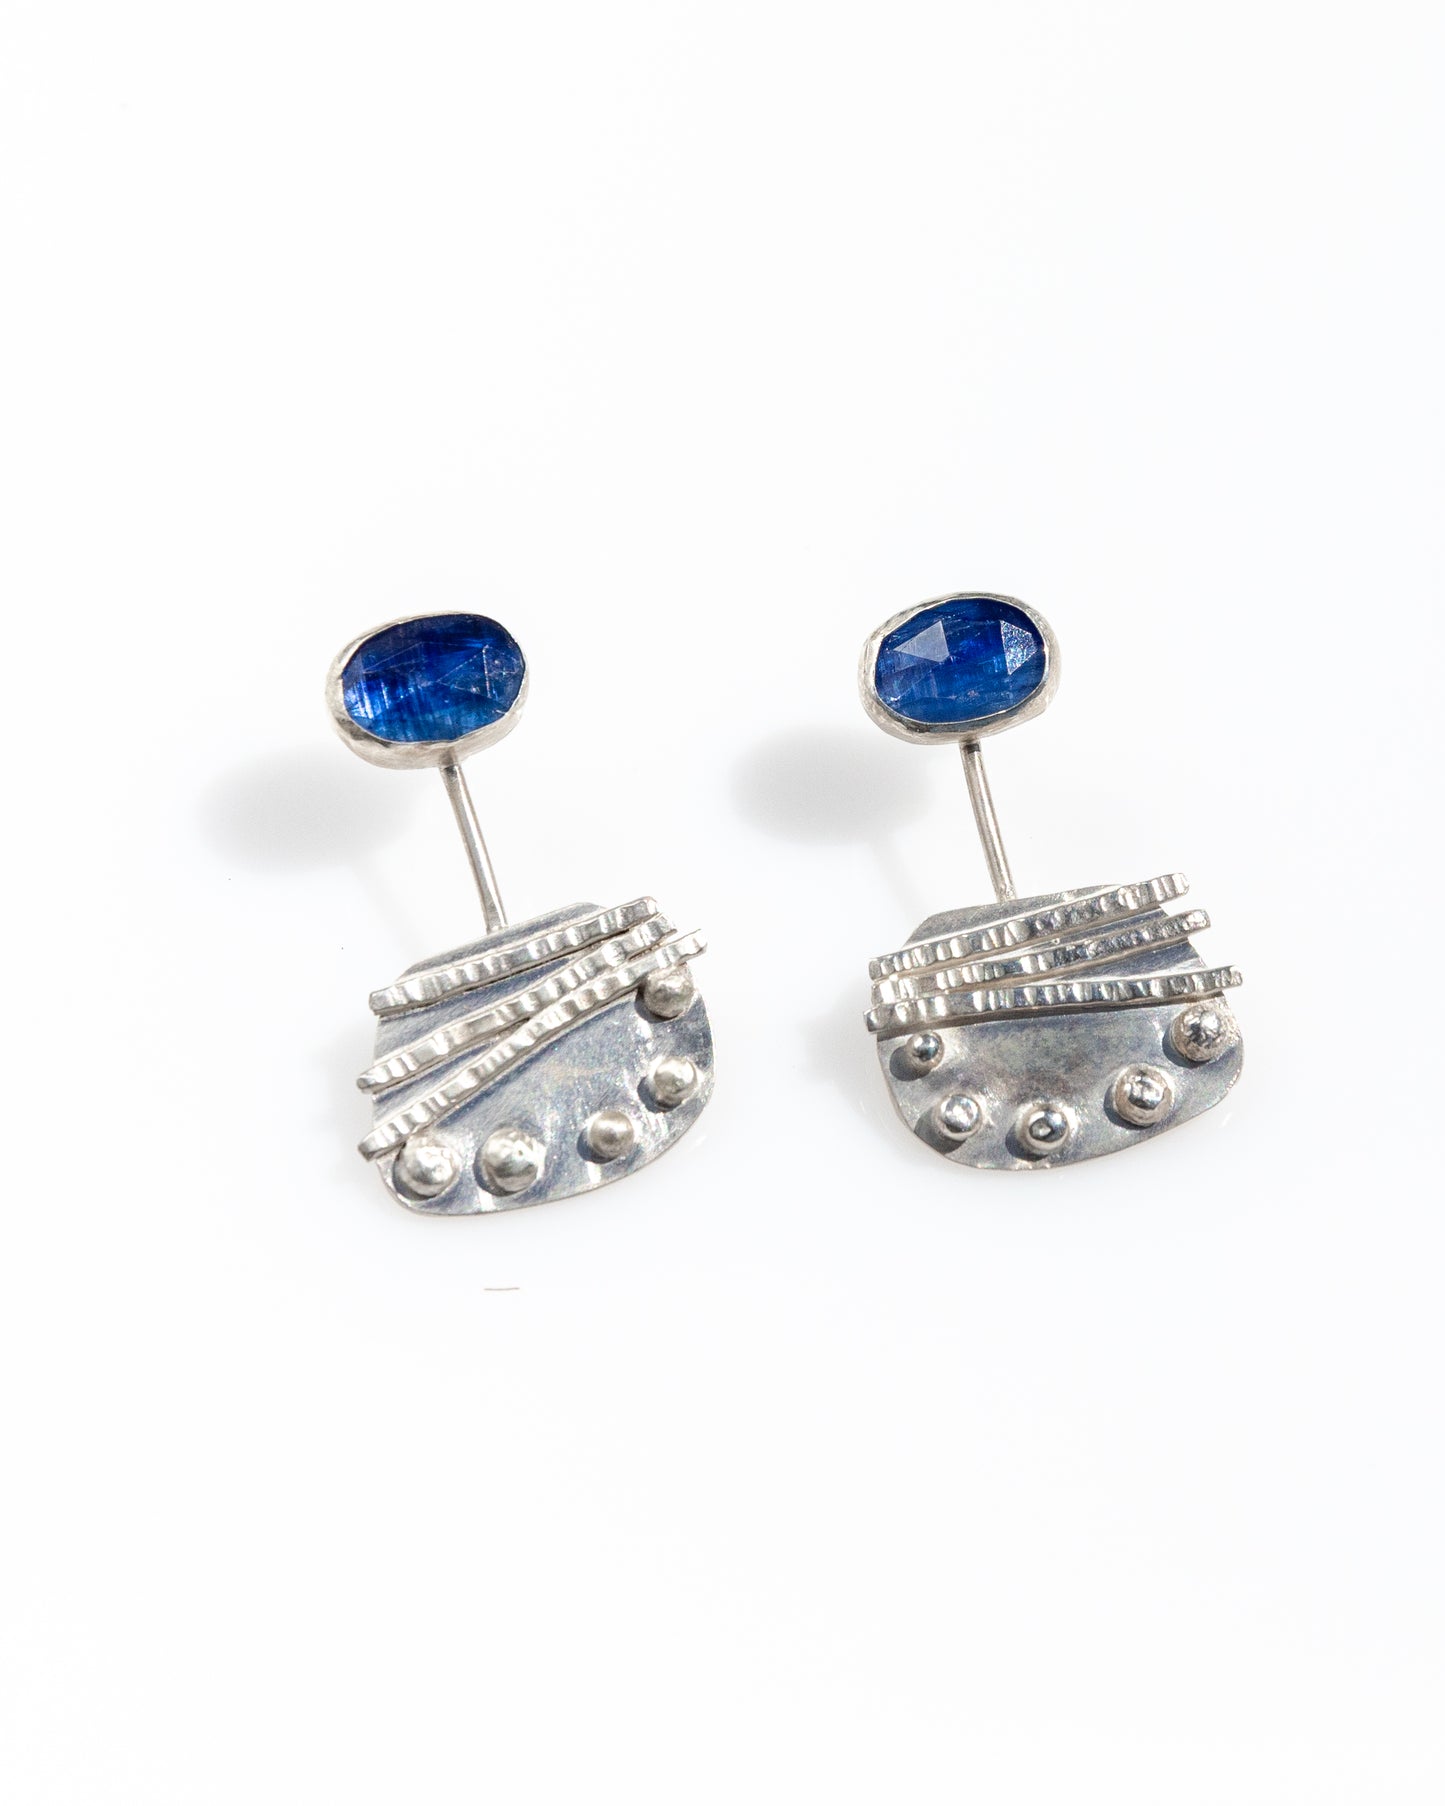 Blue Kyanite and sterling silver earrings with texture